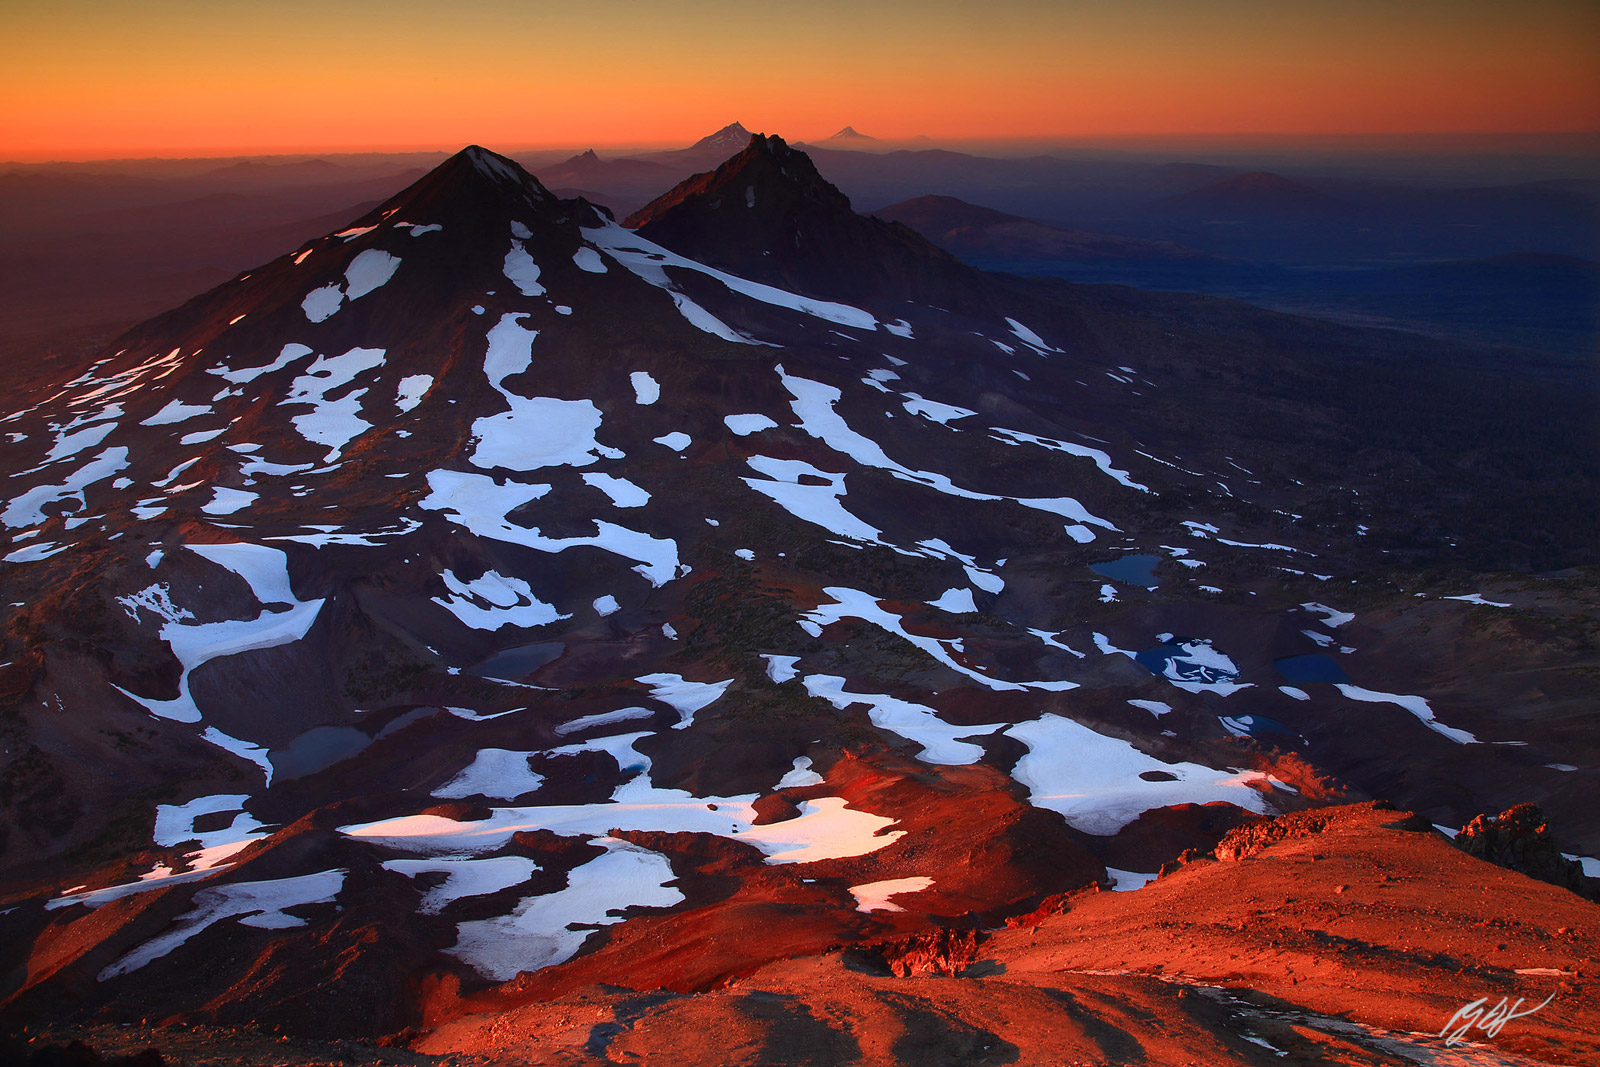 Sunset from the Summit of the South Sister, Three Sister Wilderness in Oregon